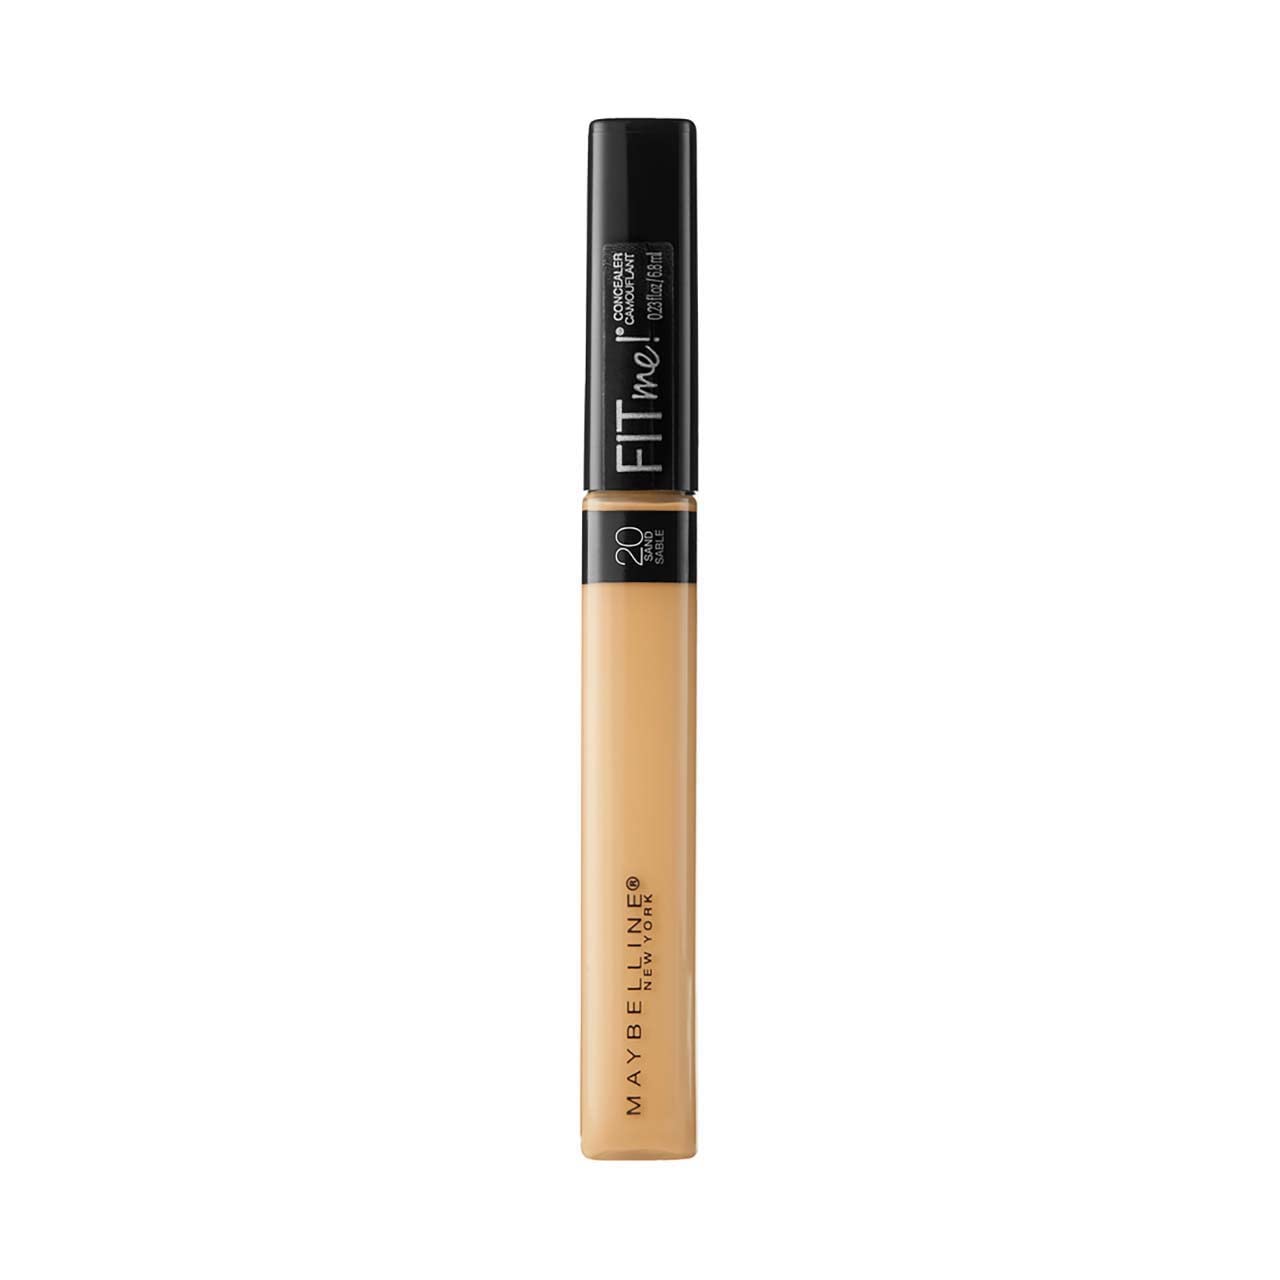 MAYBELLINE FIT ME FOUNDATION 110